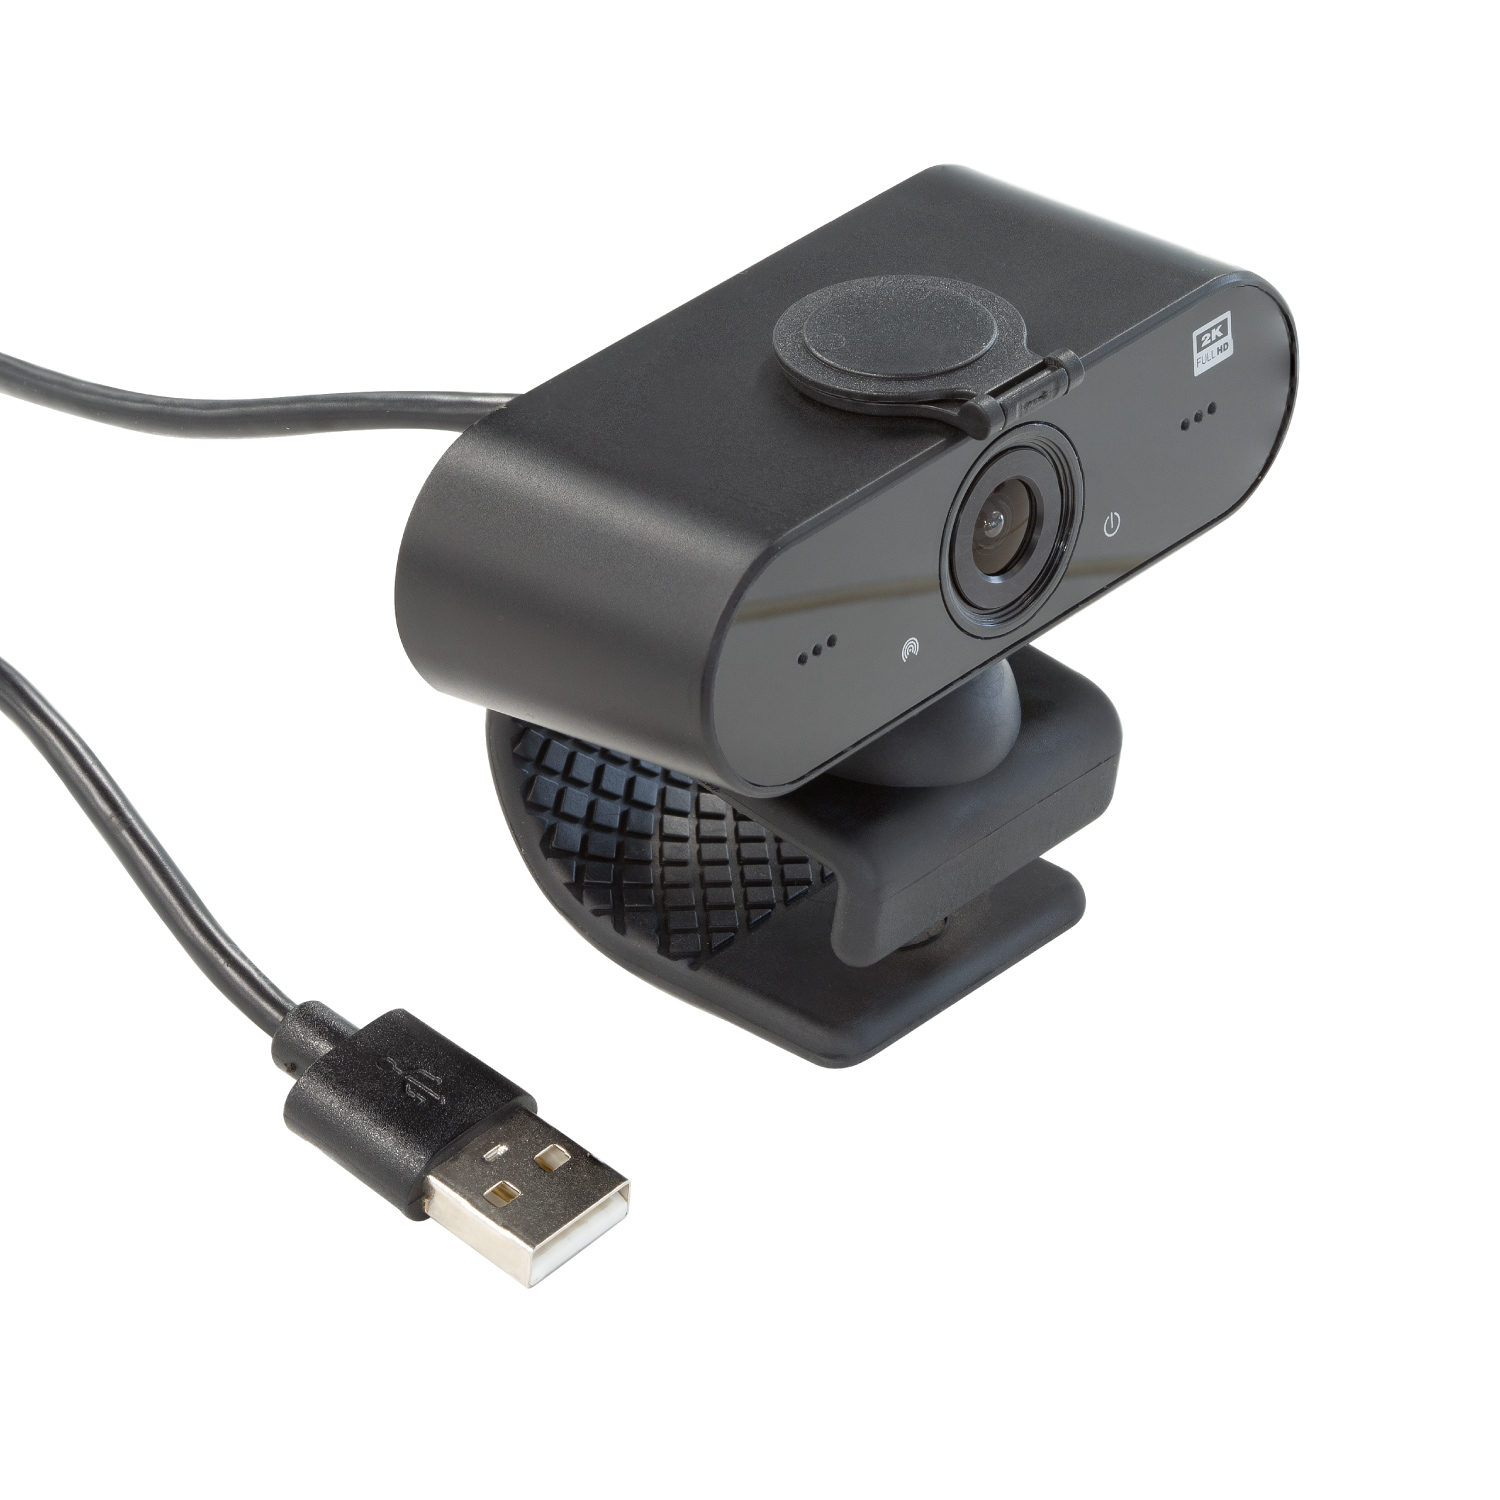 Webcam with Microphone, 2K HD Streaming USB Computer Webcam with Privacy Cover [Plug and Play] [30fps] Video Calling and Recording for Computer Laptop Desktop, USB Camera for PC Video/Gaming/Laptop (Black)